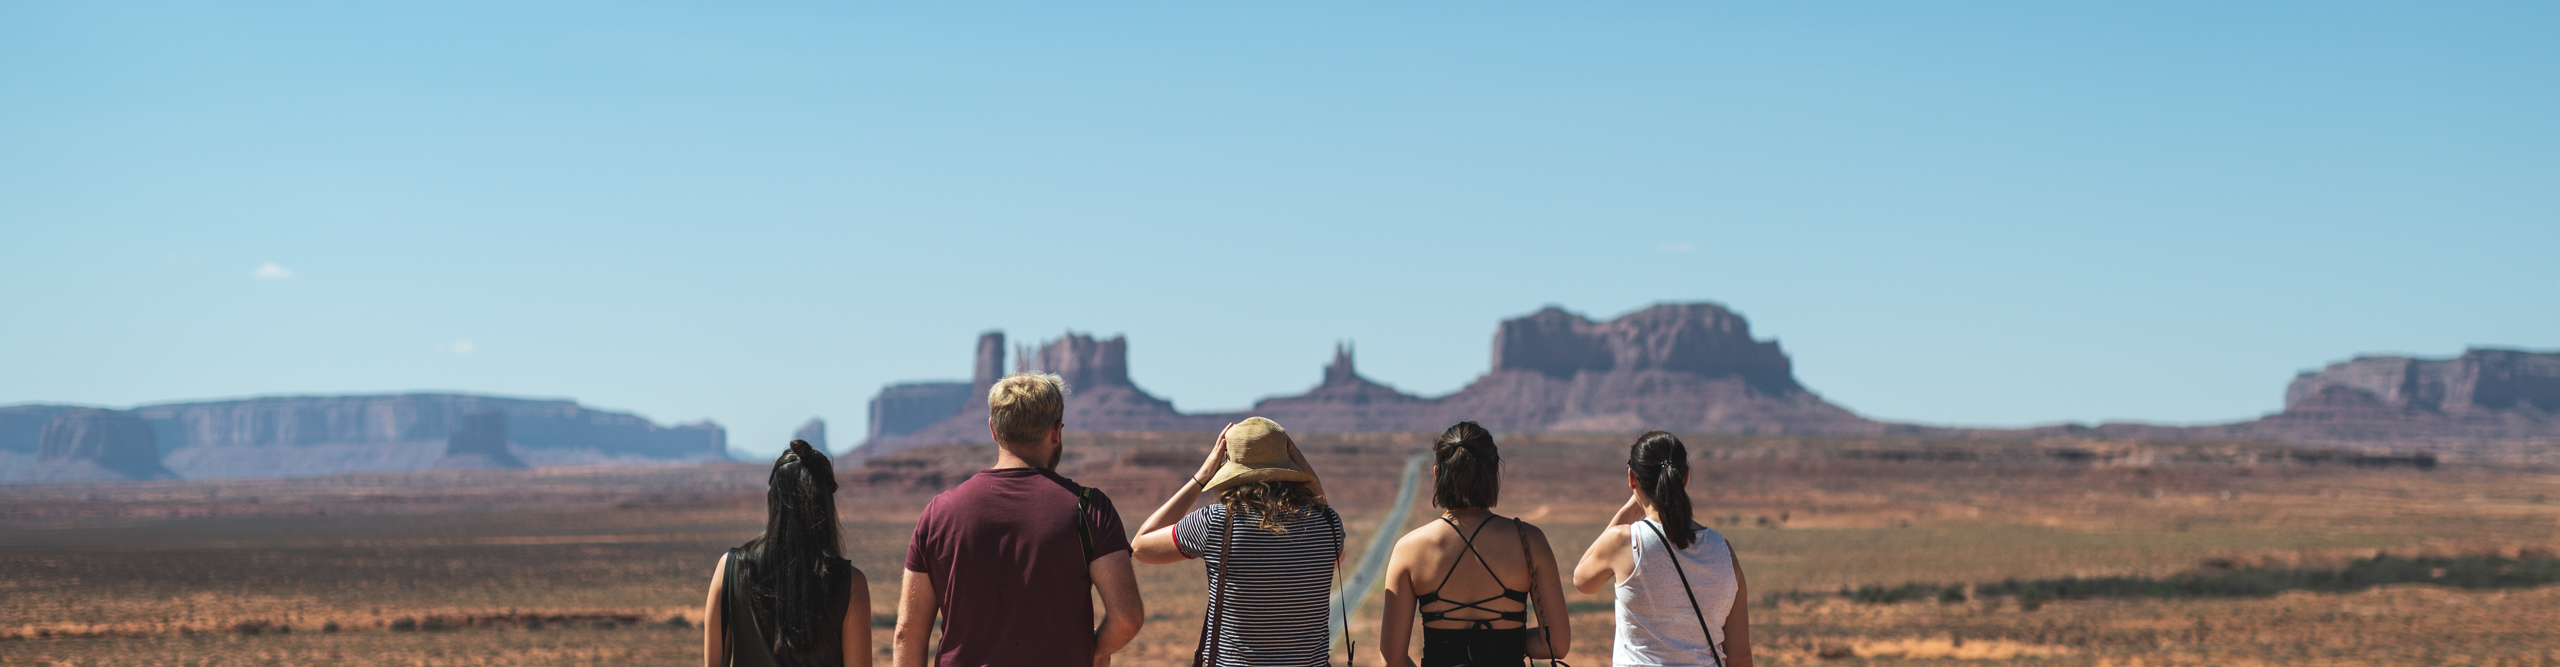 Intrepid travellers look out over Monument Valley